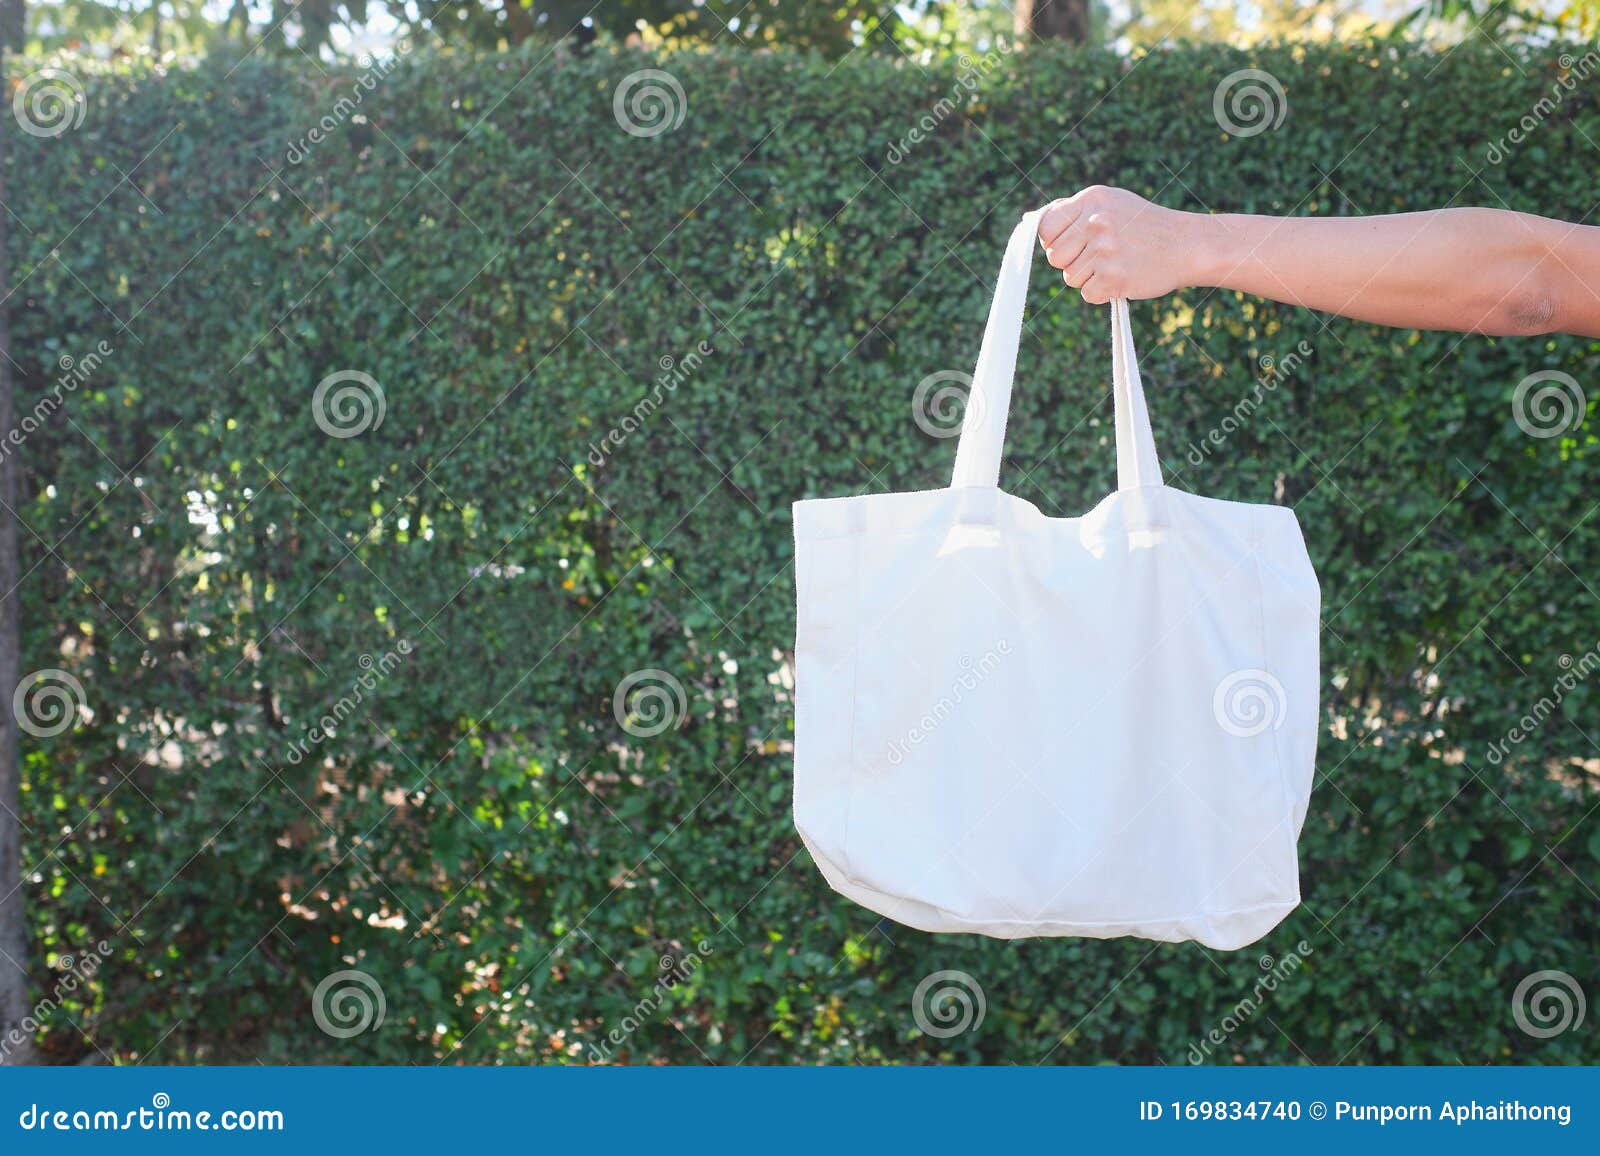 man hand holding a blank organic cotton tote bag on nature background. reusable shopping bags is good for the environment concept